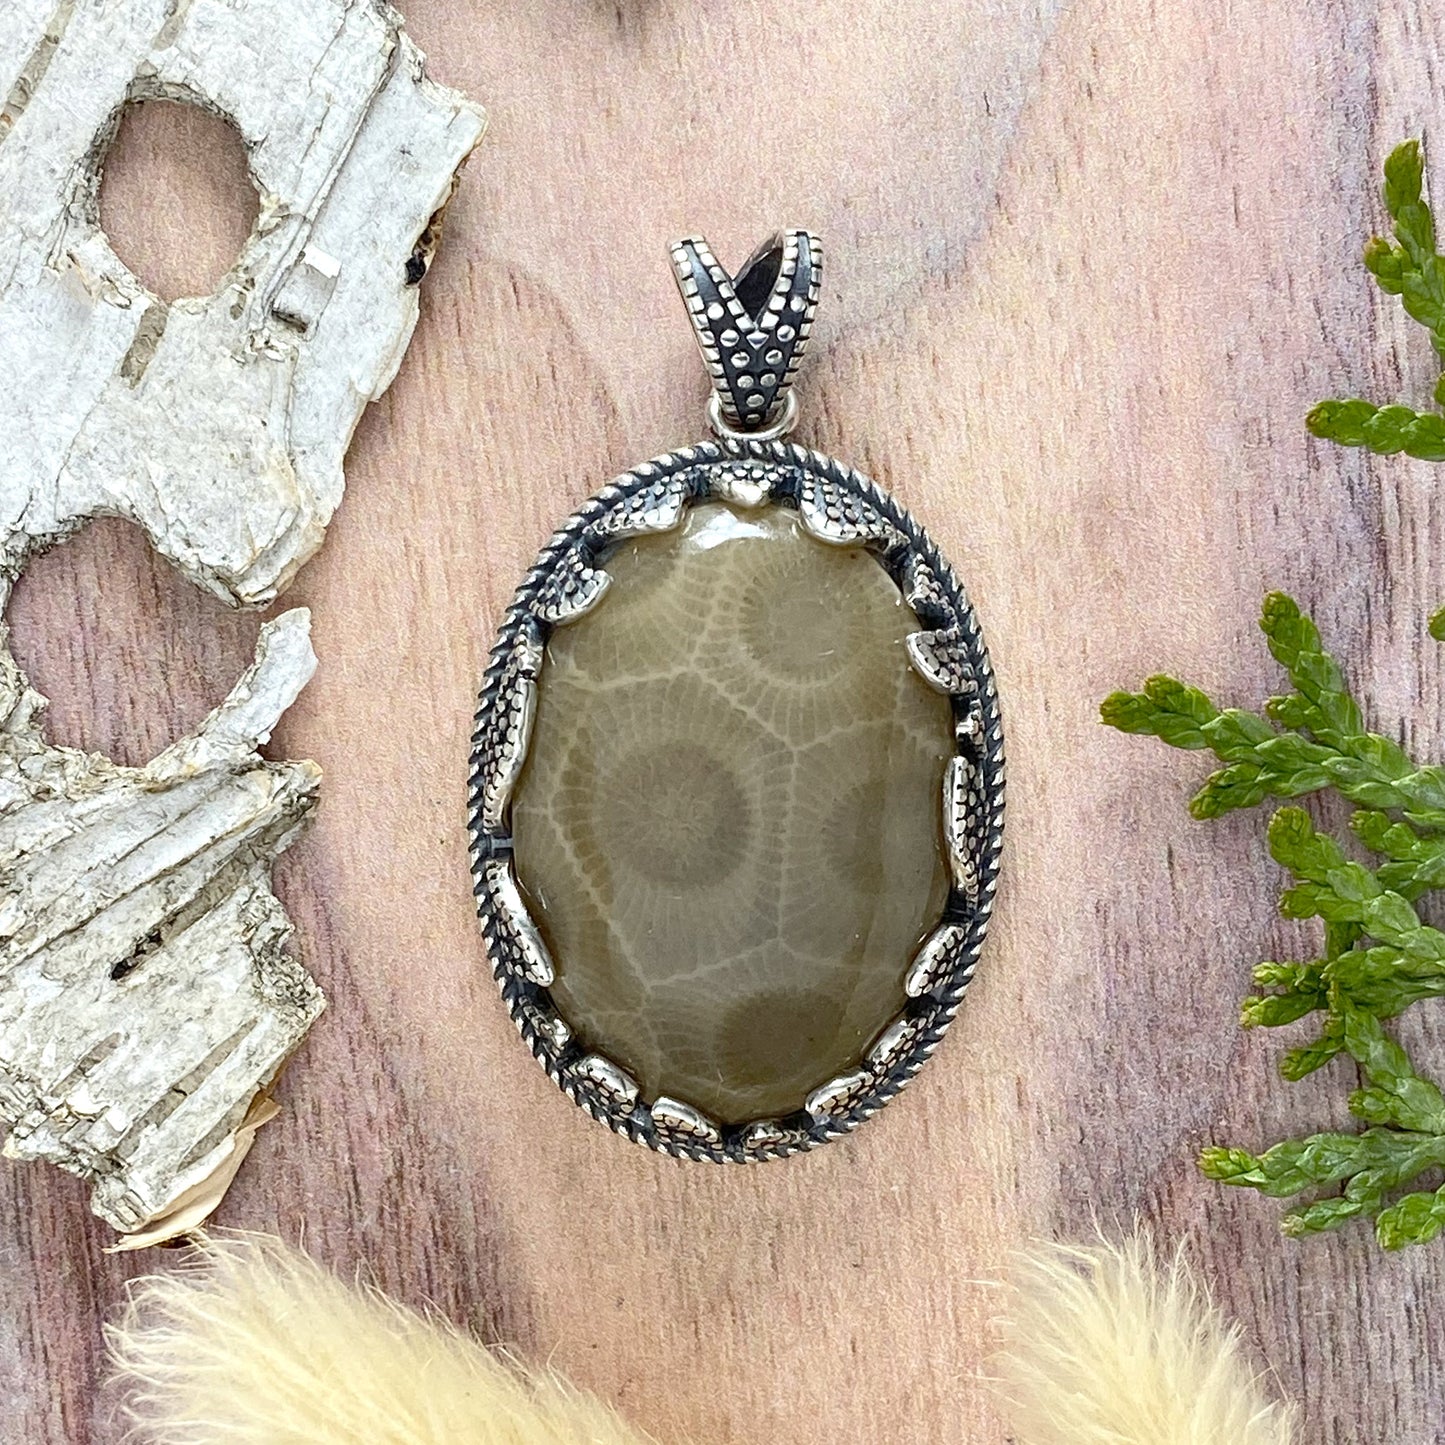 Petoskey Stone Pendant Front View - Stone Treasures by the Lake